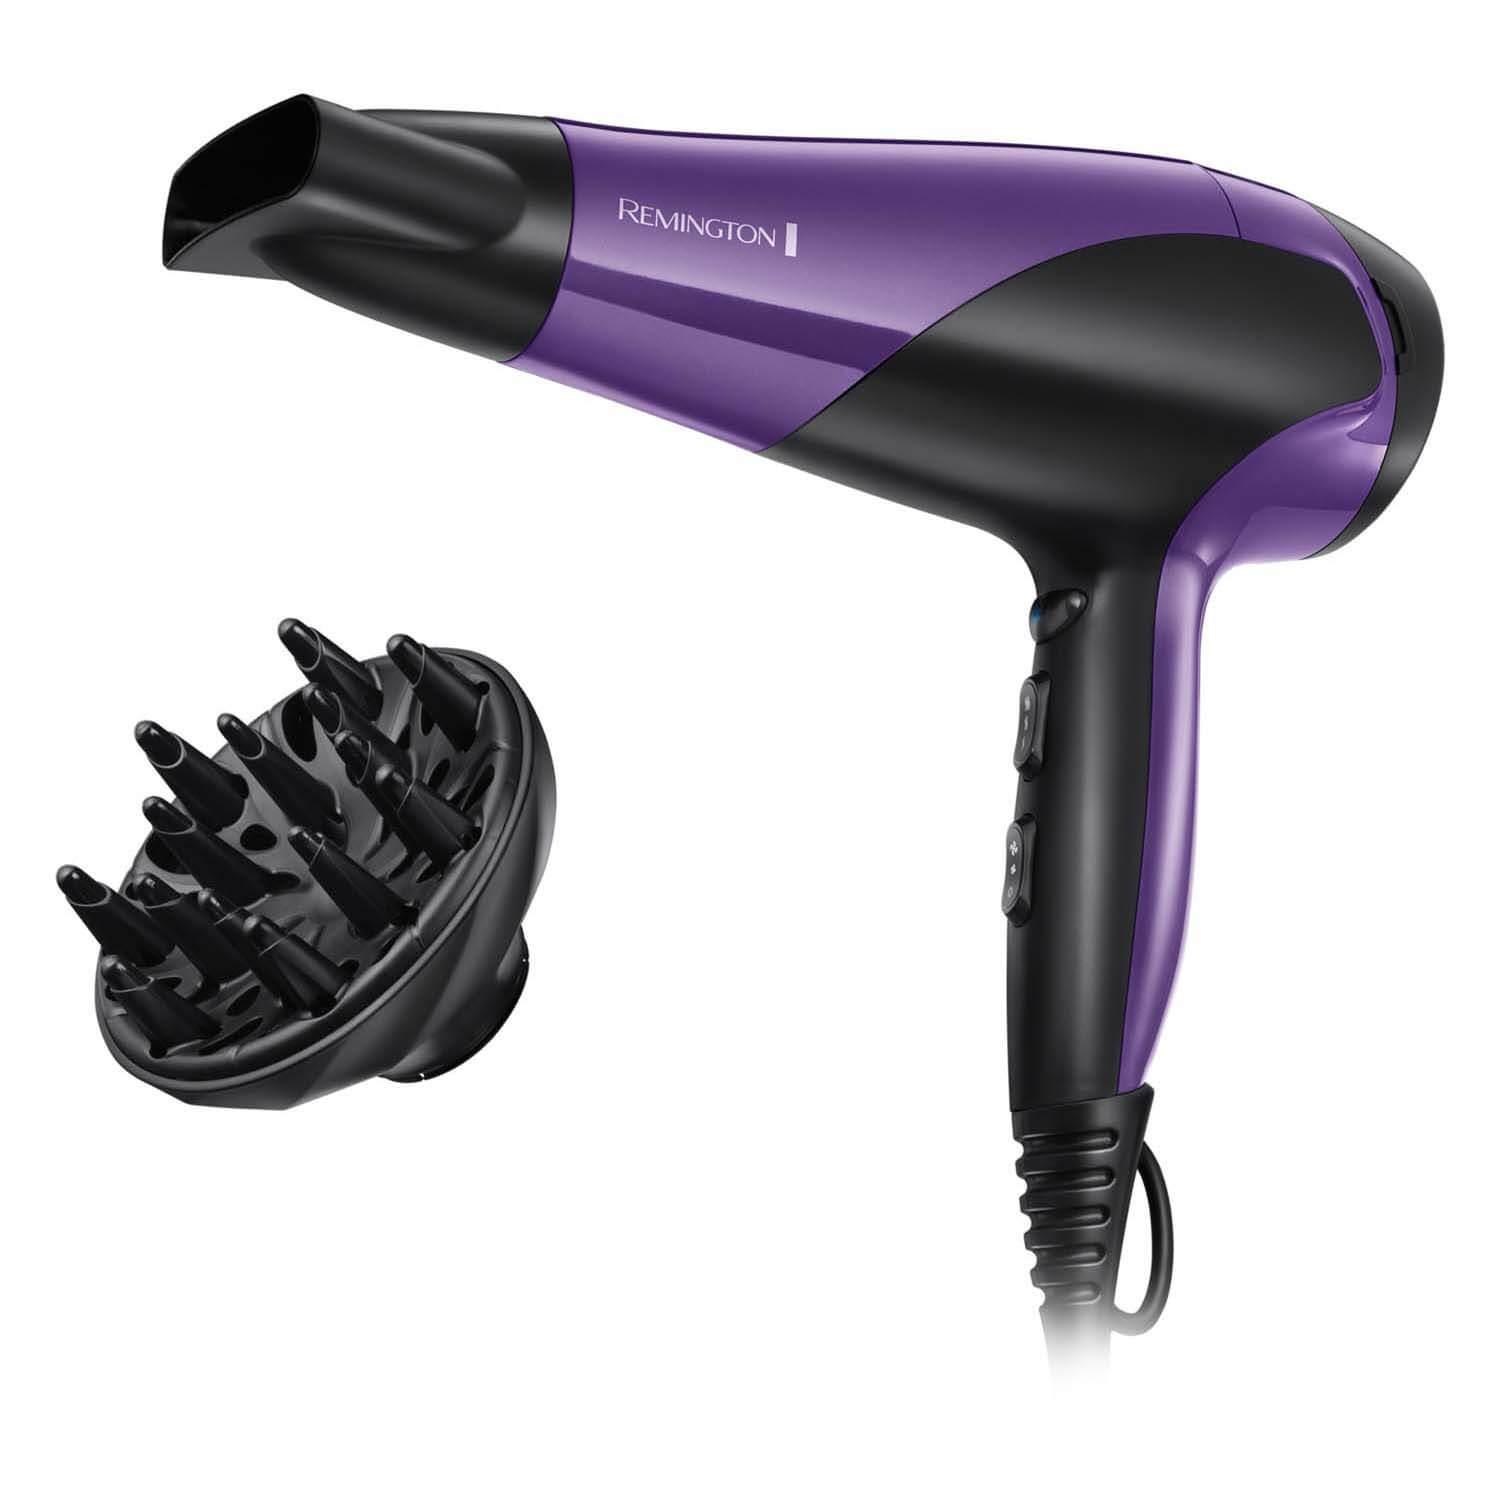 Remington D3190 Ionic Dry 2200W Hair Dryer 1 Shaws Department Stores